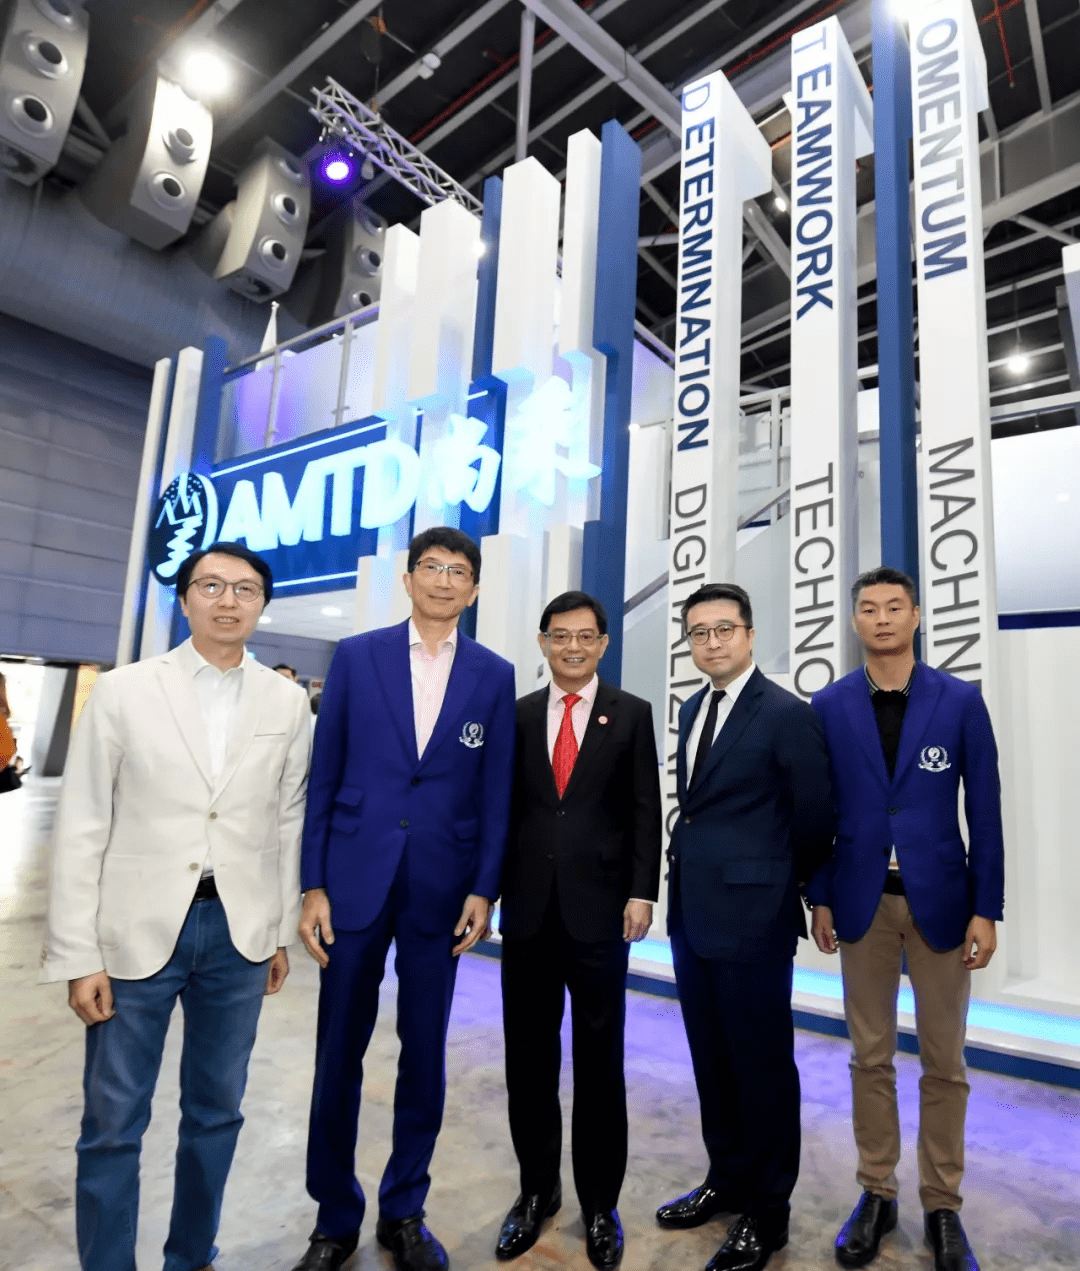 #AMTD x SFF Vol.4 | Heng Swee Keat, Deputy Prime Minister and Minister for Finance of Singapore, Vivian Balakrishnan, Minister for Foreign Affairs of Singapore and Ravi Menon, Managing Director of MAS met Calvin Choi